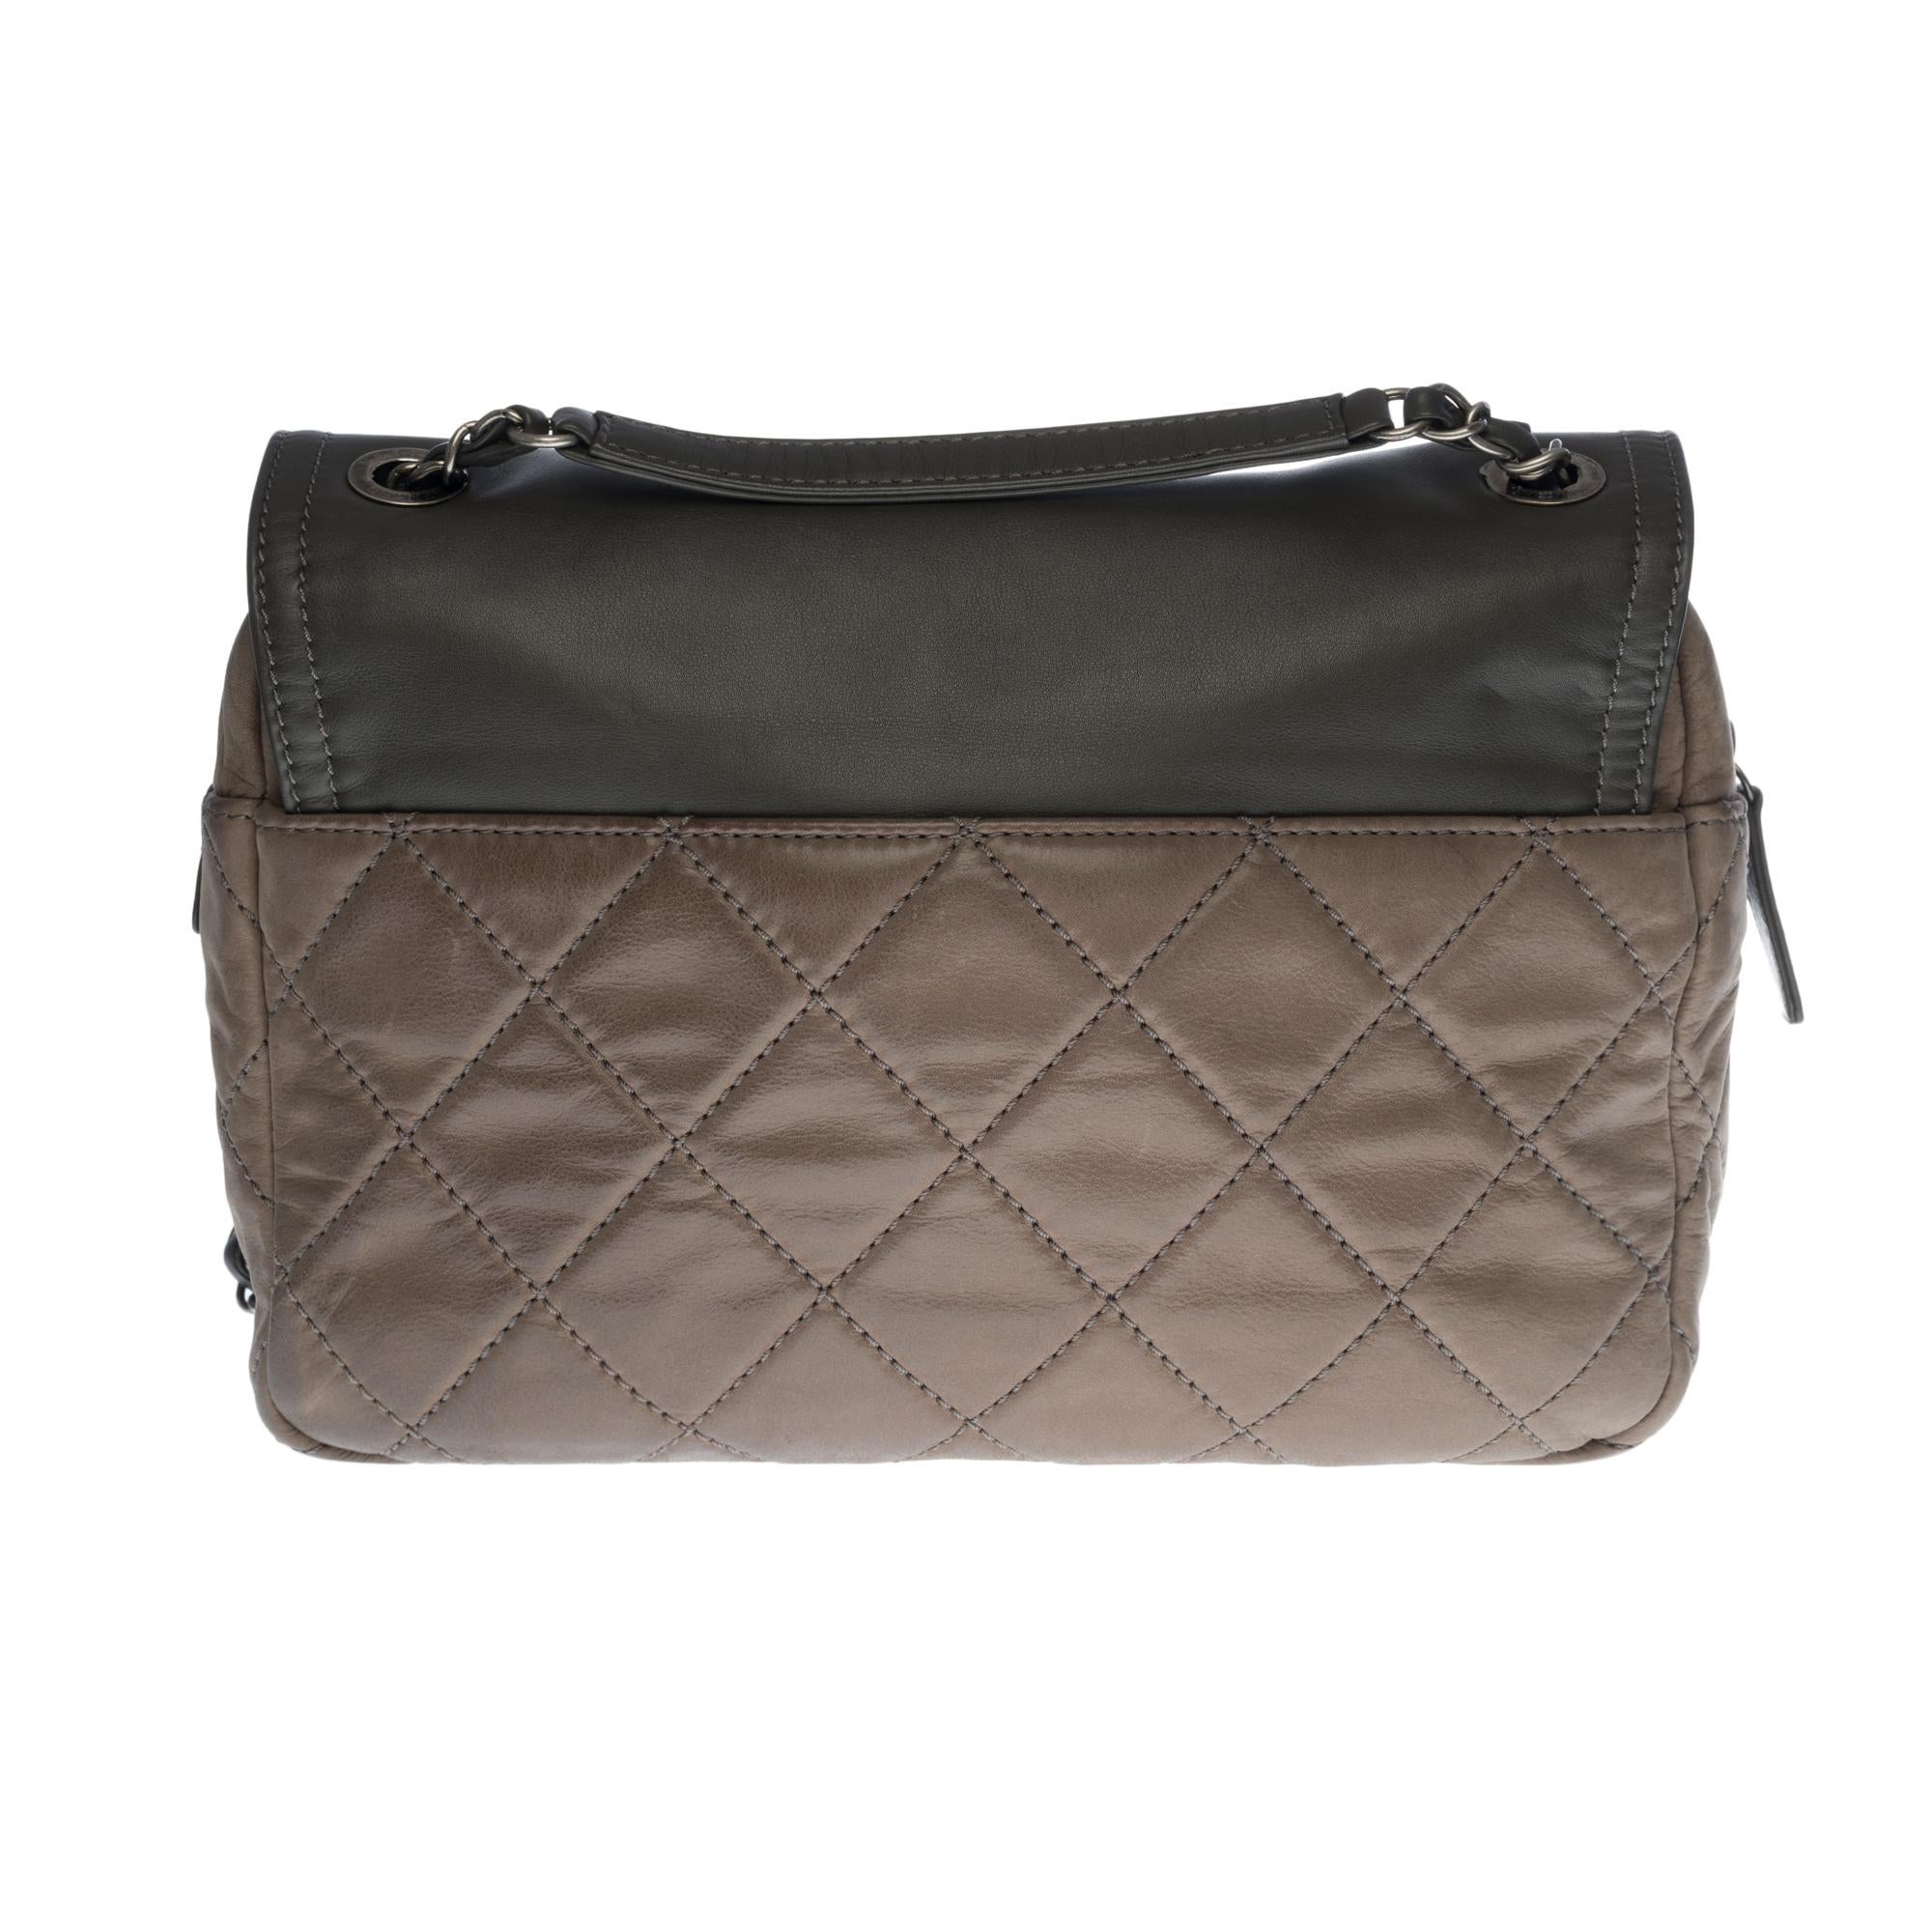 The practical Chanel Classique Flap bag in grey semi-quilted leather, antique silver metal hardware, 1 silver metal chain handle intertwined with grey leather for a hand, shoulder or shoulder strap
Black canvas interior
Flap closure with CC